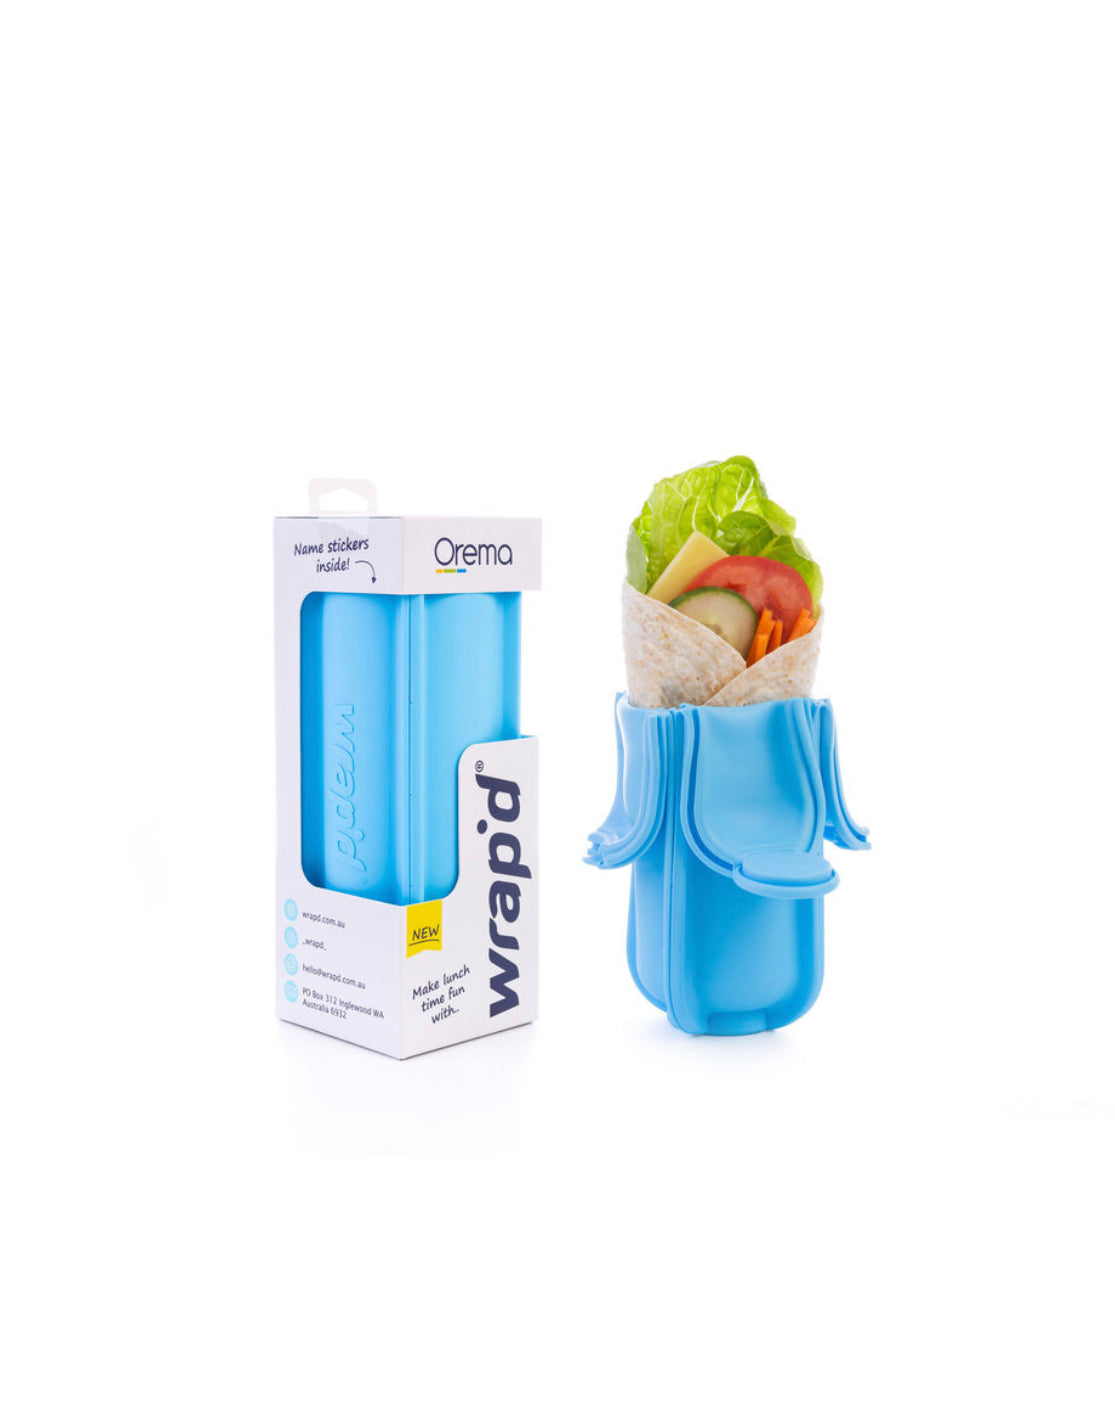 Wrap'd, Silicone Wrap Holder